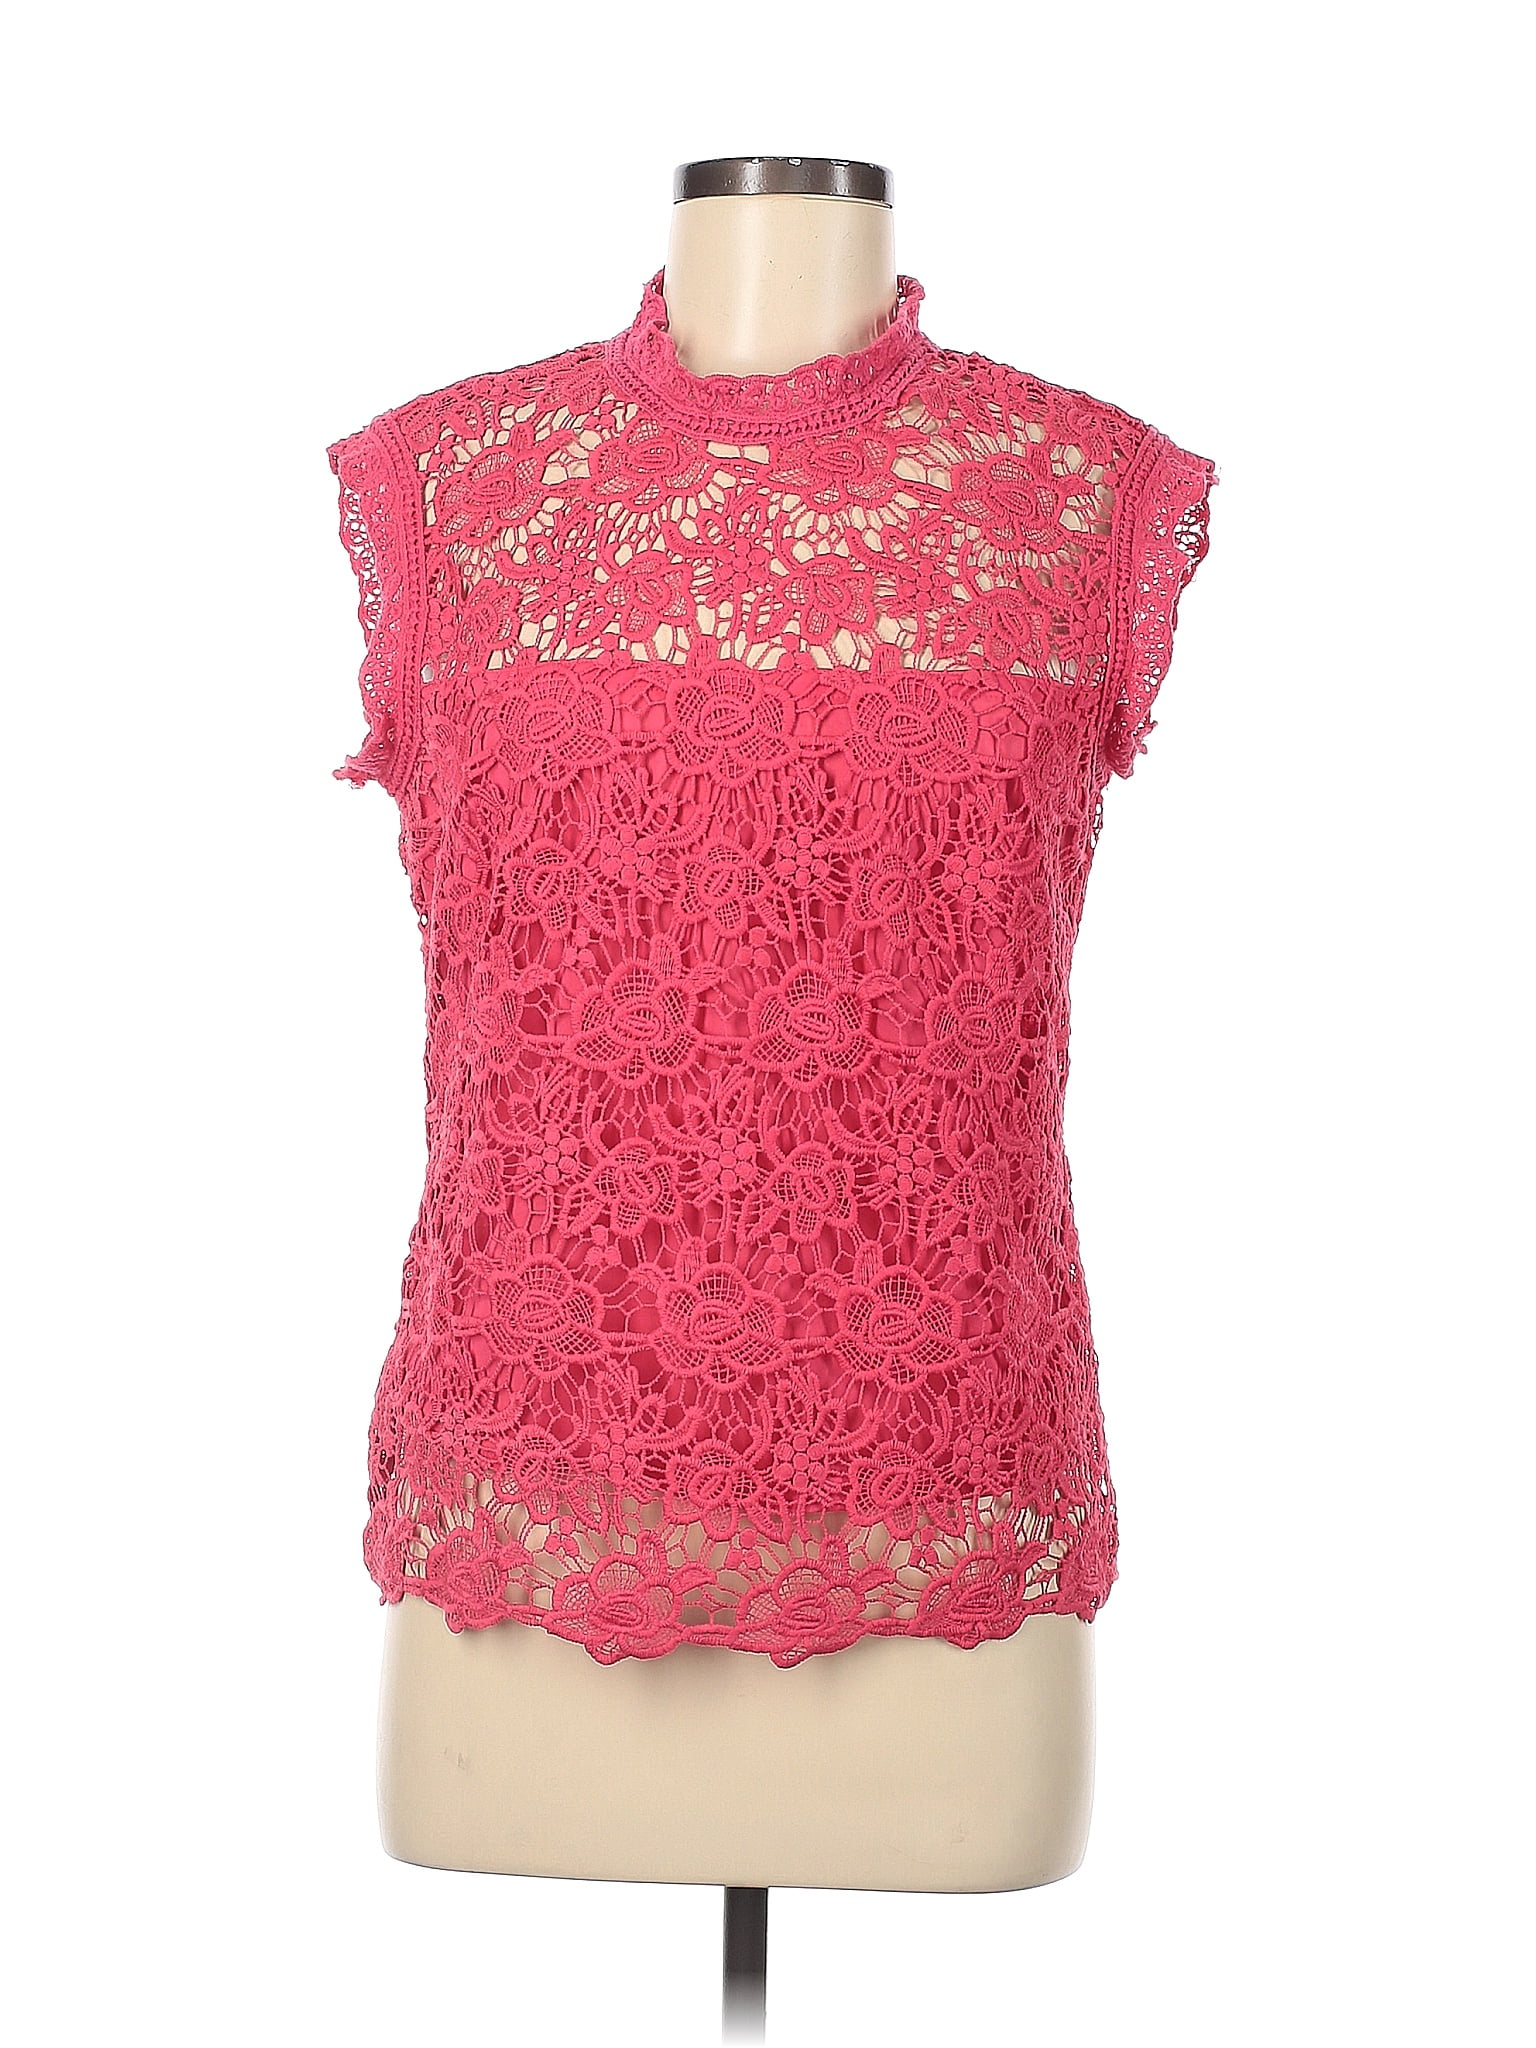 Nanette Lepore 3/4 Sleeve Lace Shirt Dress in Pink